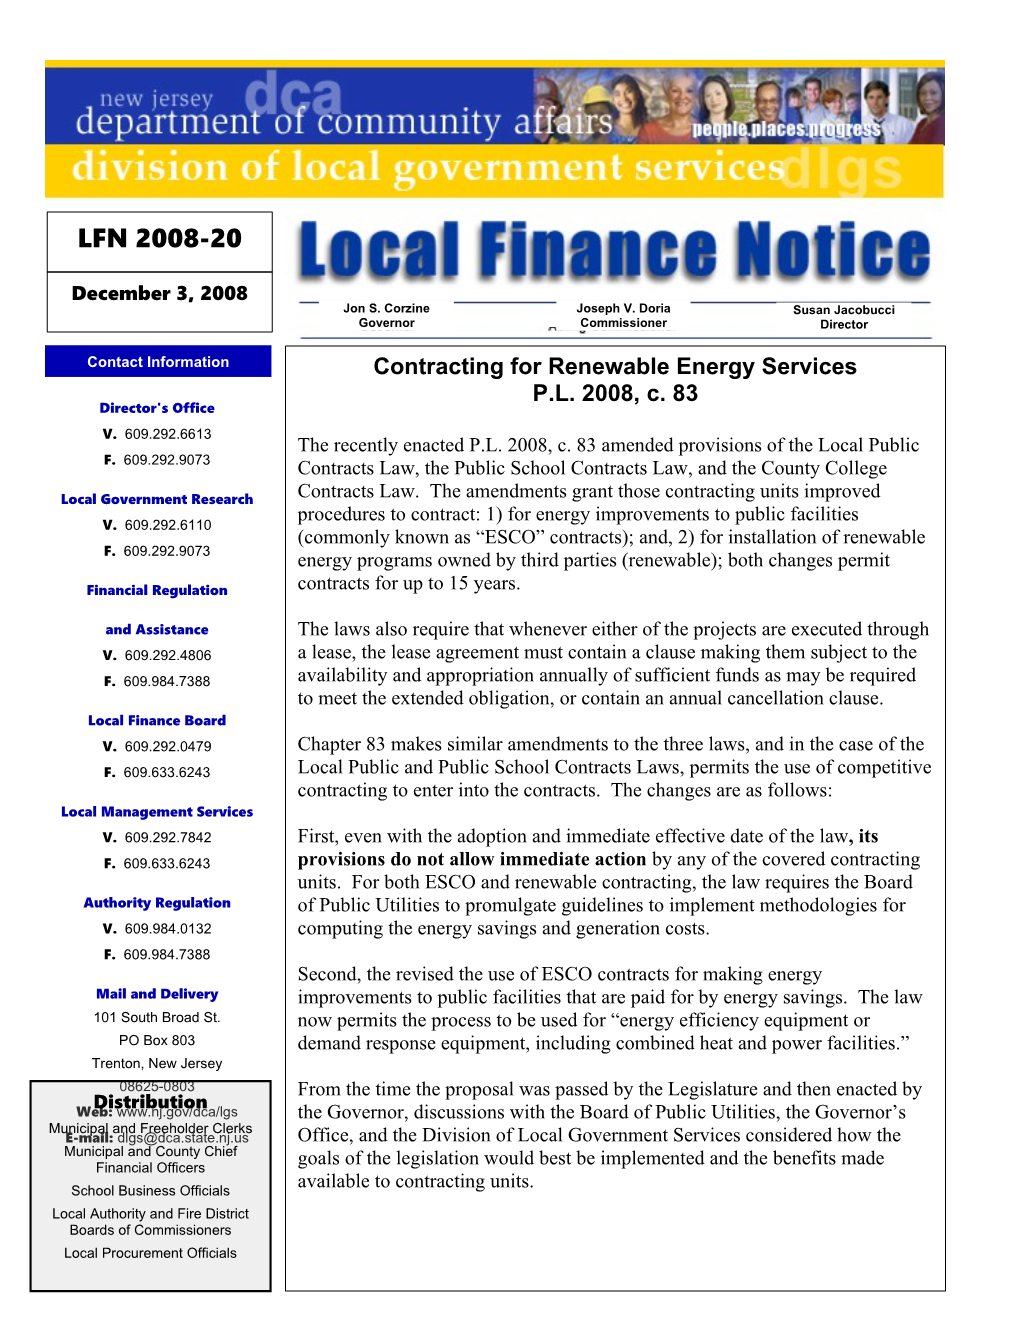 Local Finance Notice 2008-2012/3/08Page 1